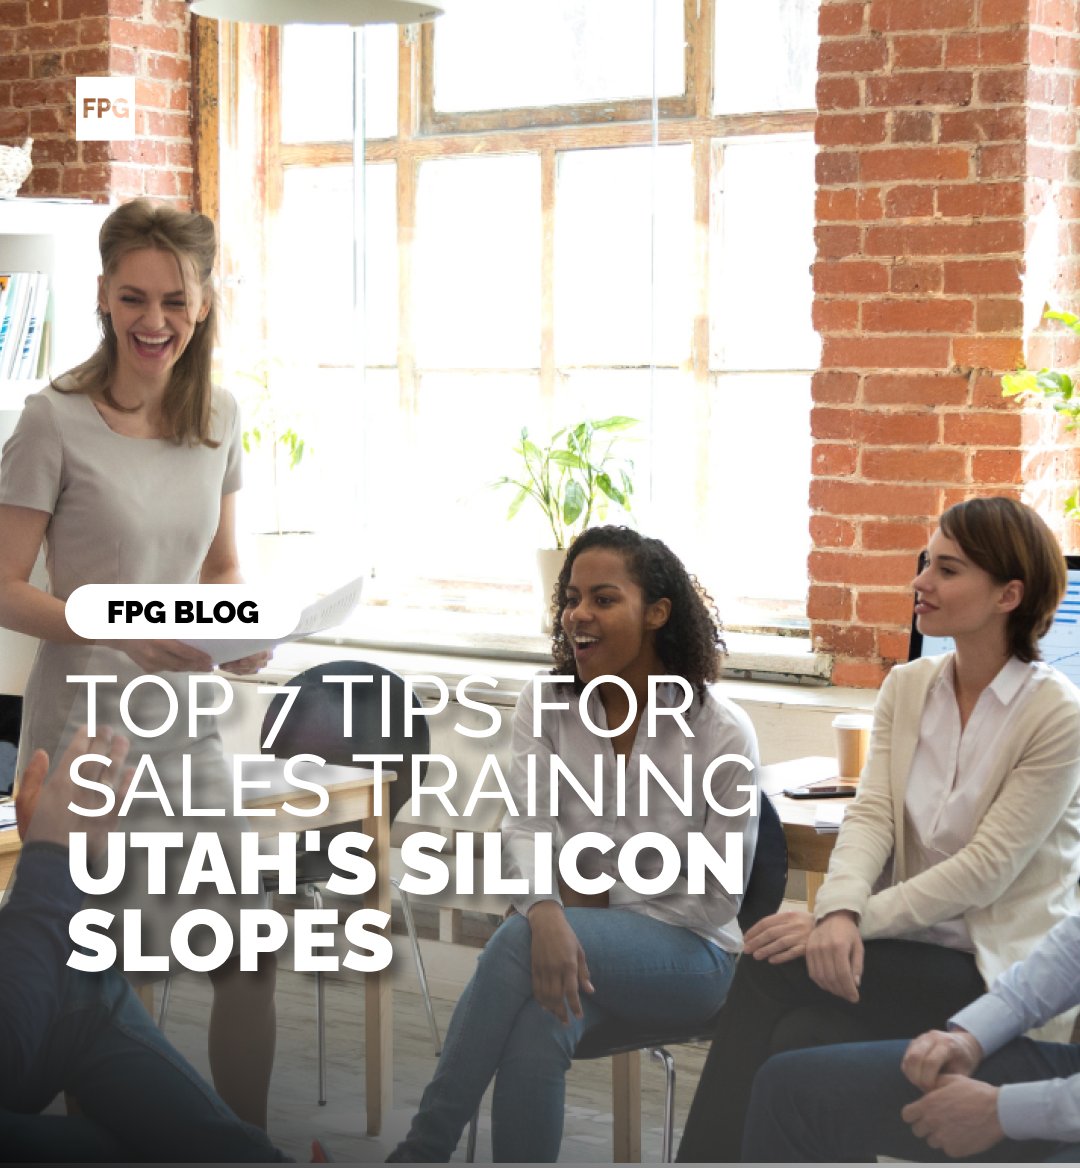 🚀🏔️ Utah's #SiliconSlopes is on the rise, and so is the need for top-notch tech sales training! 🚀🏔️ 

Read more! fpg.com/blog/top-7-tip…

#FPGBlog #TechSales #SaaS #SalesTraining #UtahTech